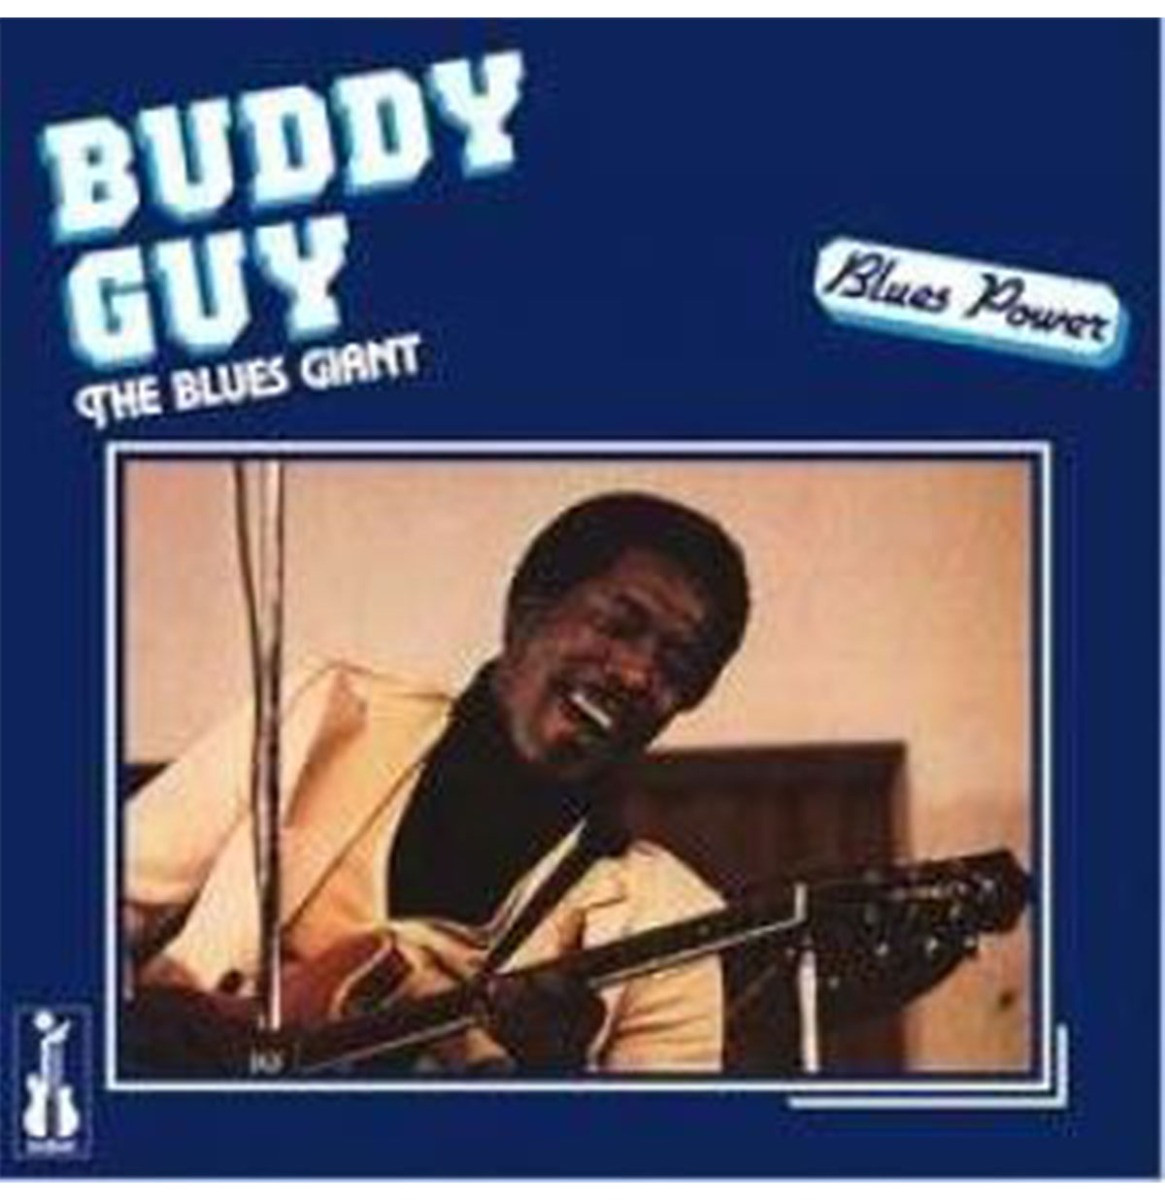 Buddy Guy - The Blues Giant LP